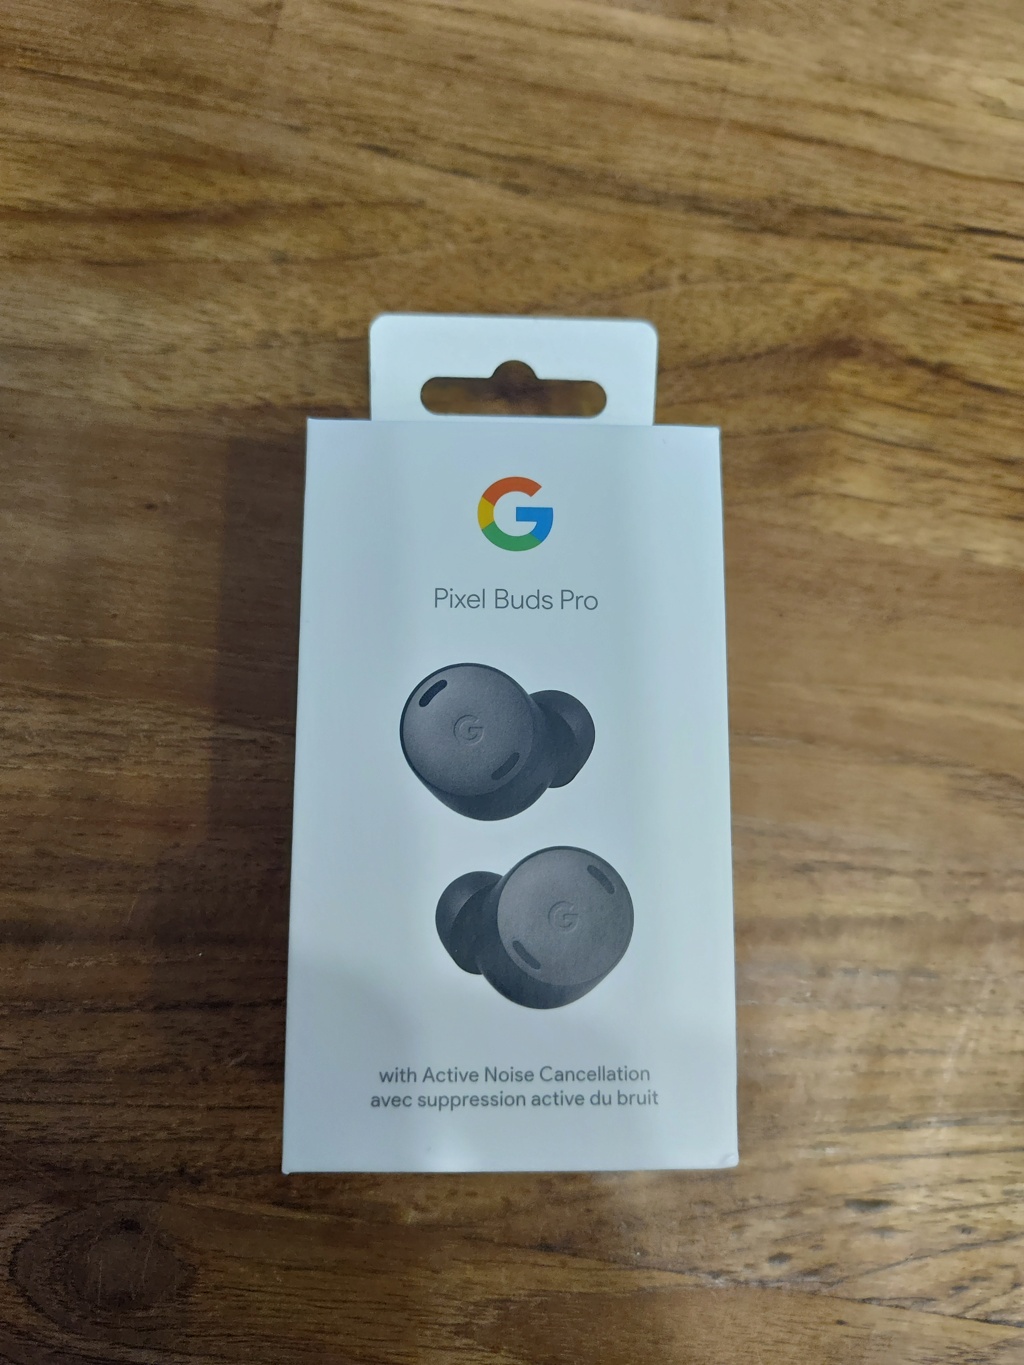 [Vds] Google Pixel Buds pro 2 neufs / Beoplay E8 2/ chassis drone fpv/ wifi mesh / Casque sennheiser / trackball Img_2011